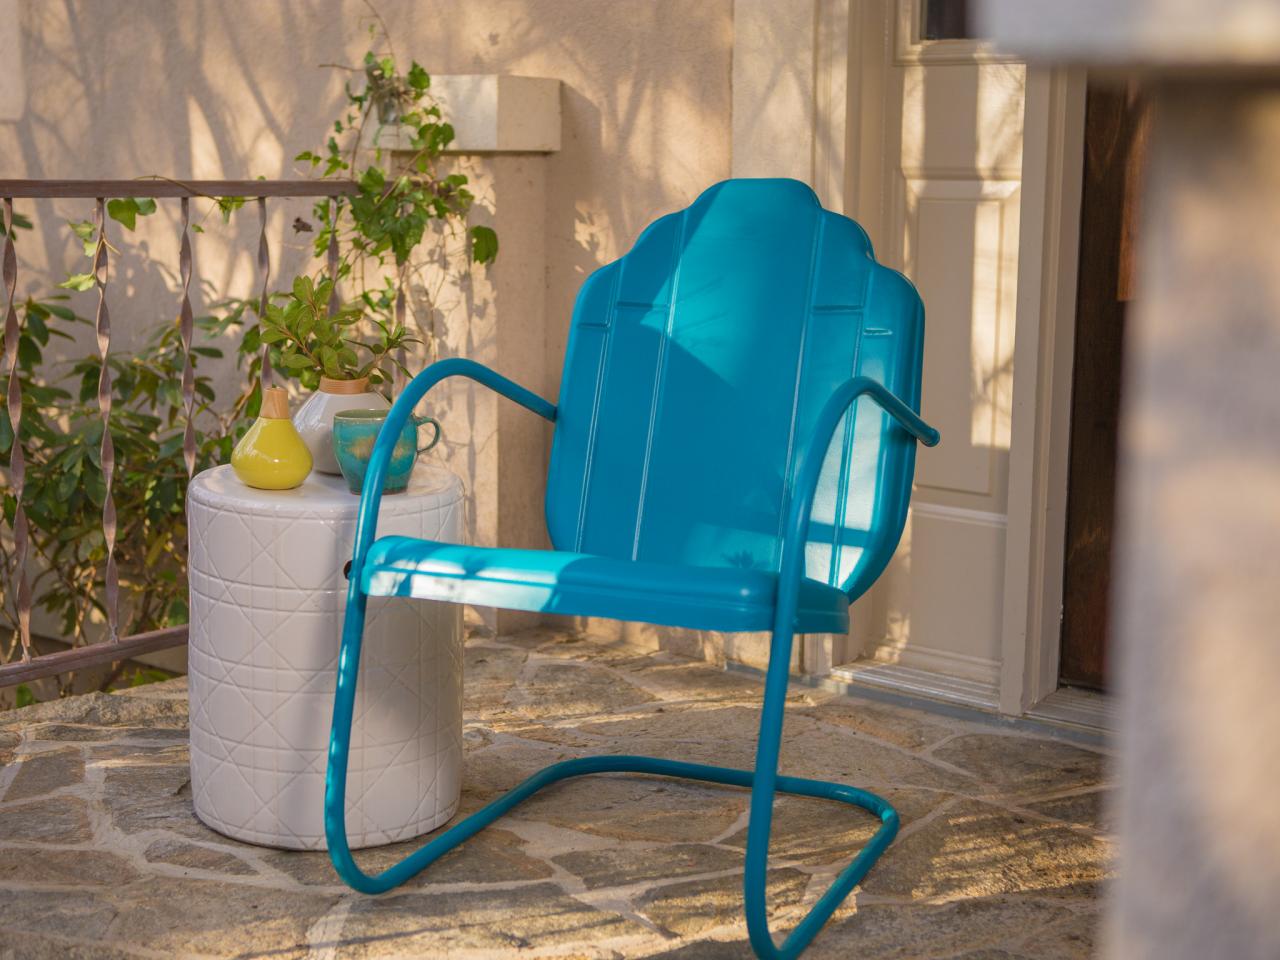 How To Paint An Outdoor Metal Chair Tos Diy - How To Clean Black Iron Outdoor Furniture